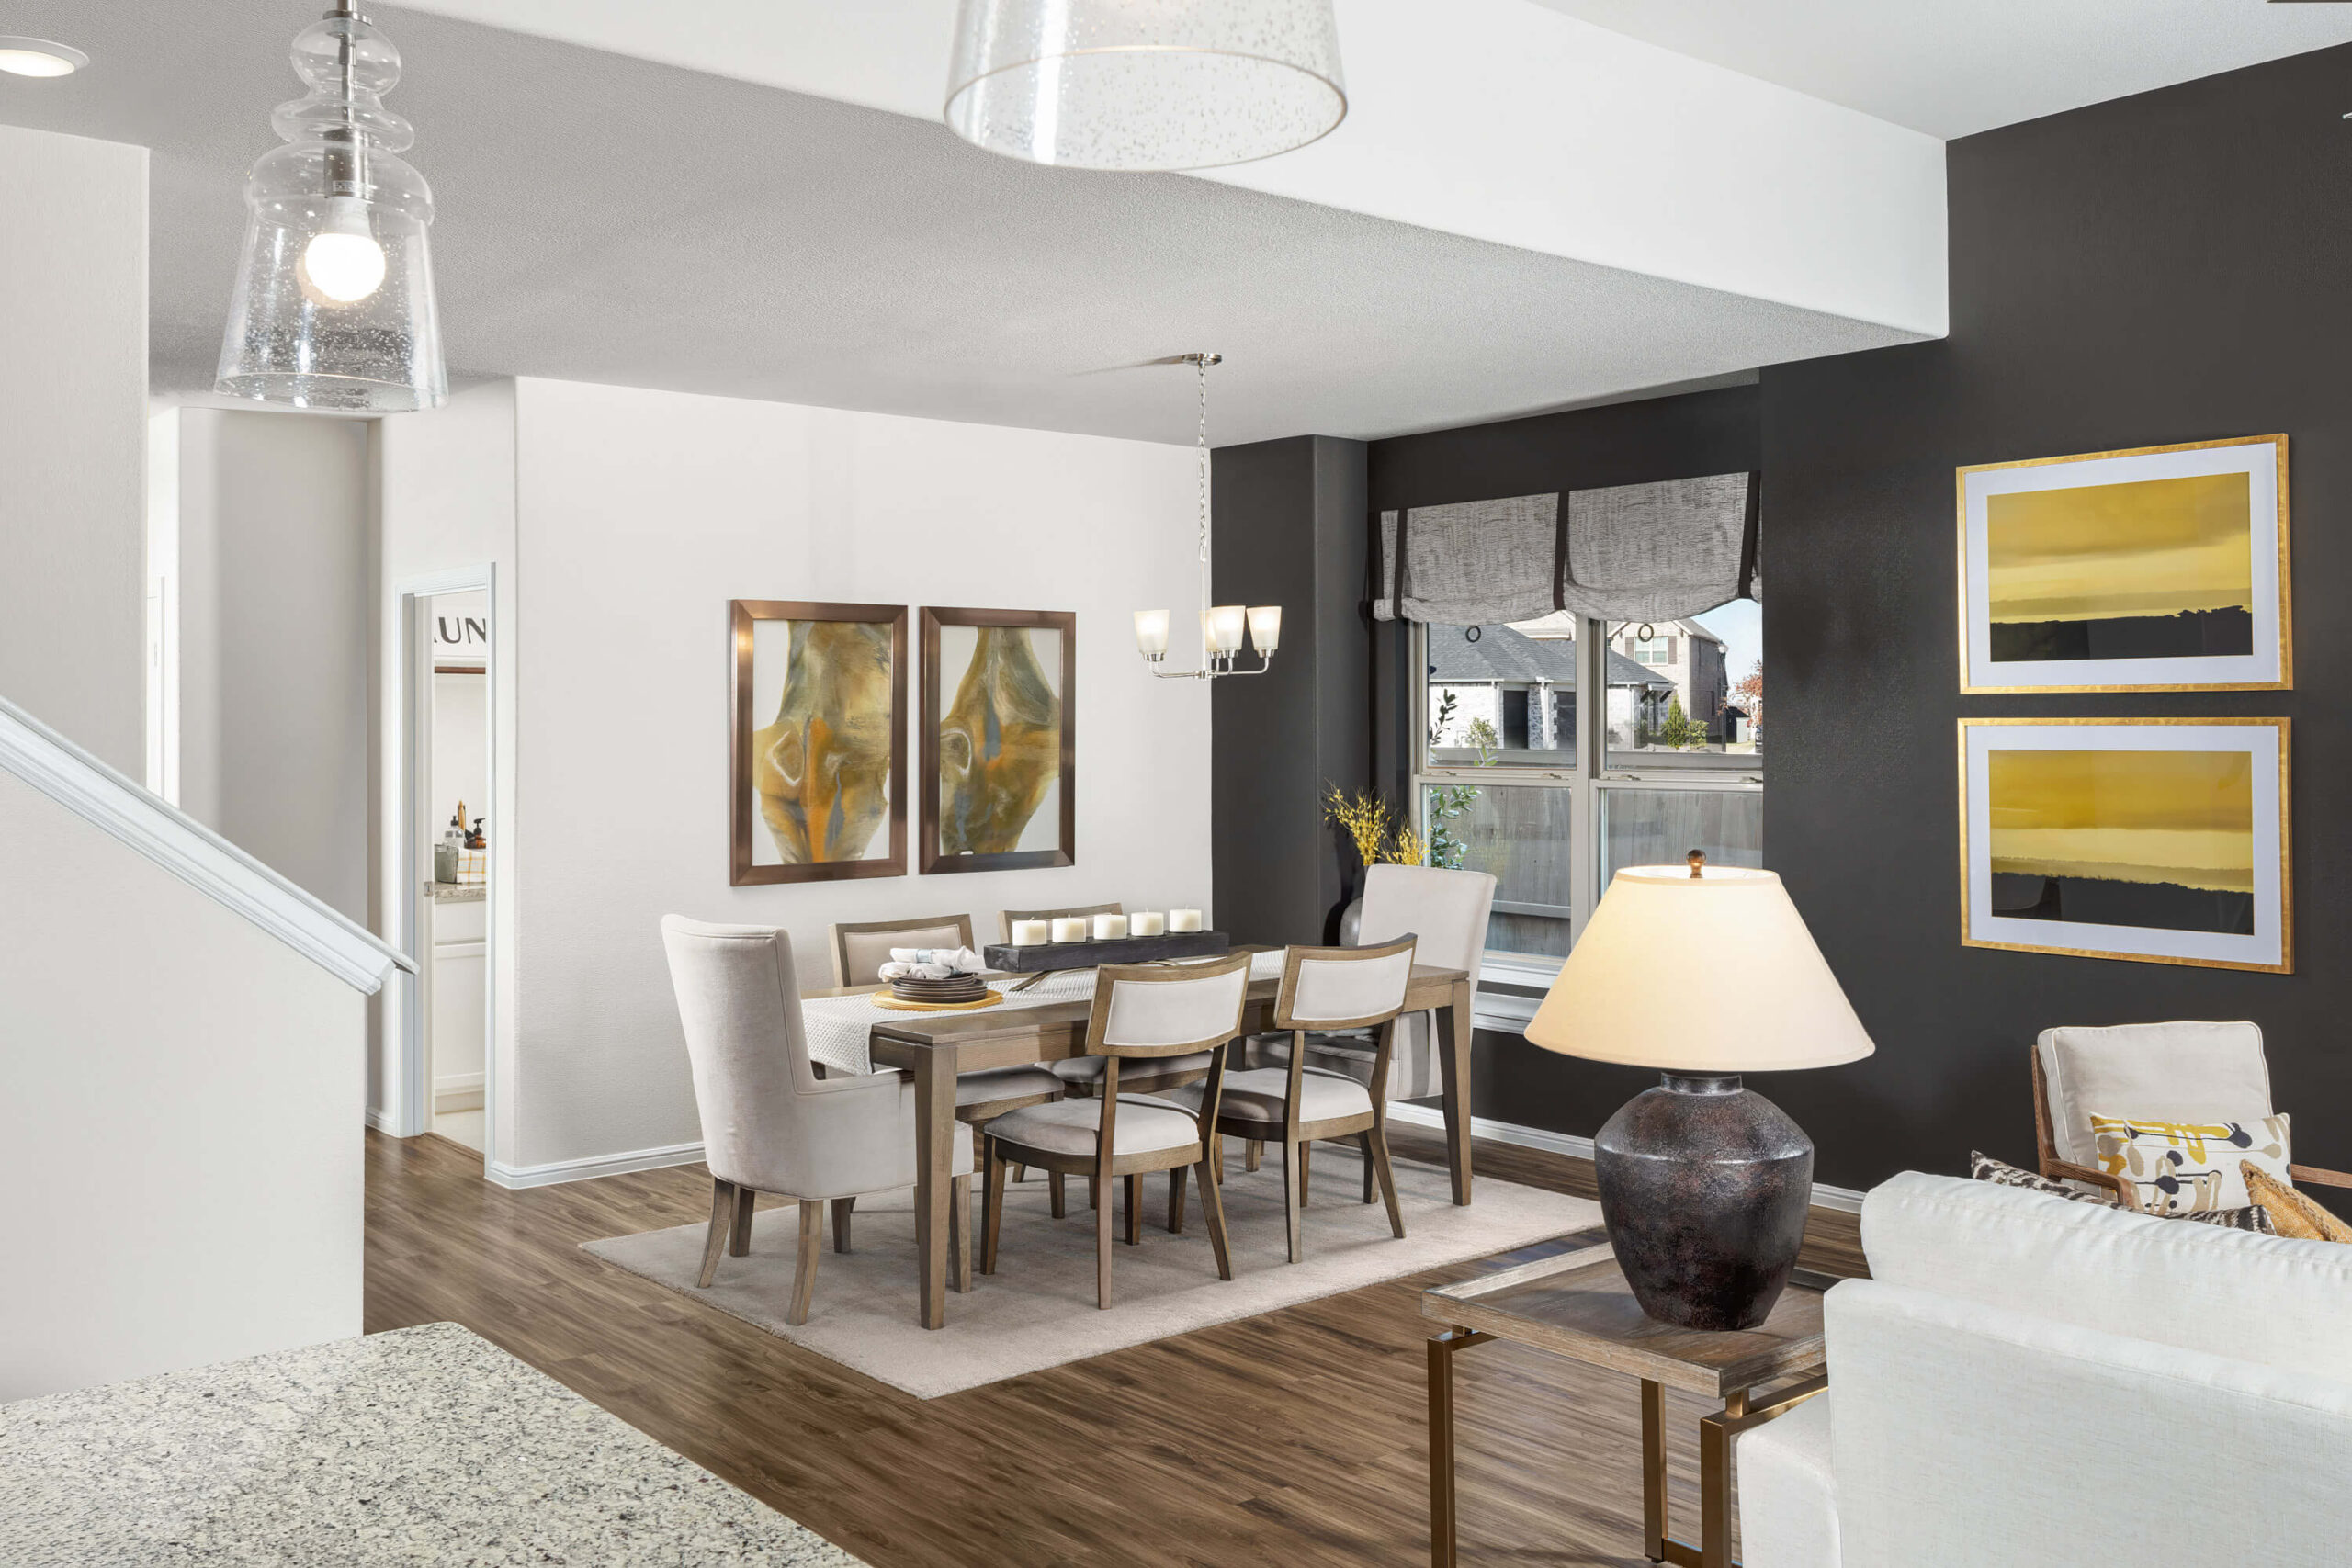 Modern dining room in new homes in DFW, featuring contrasting white and dark walls, a wooden table, upholstered chairs, and decorative artwork.